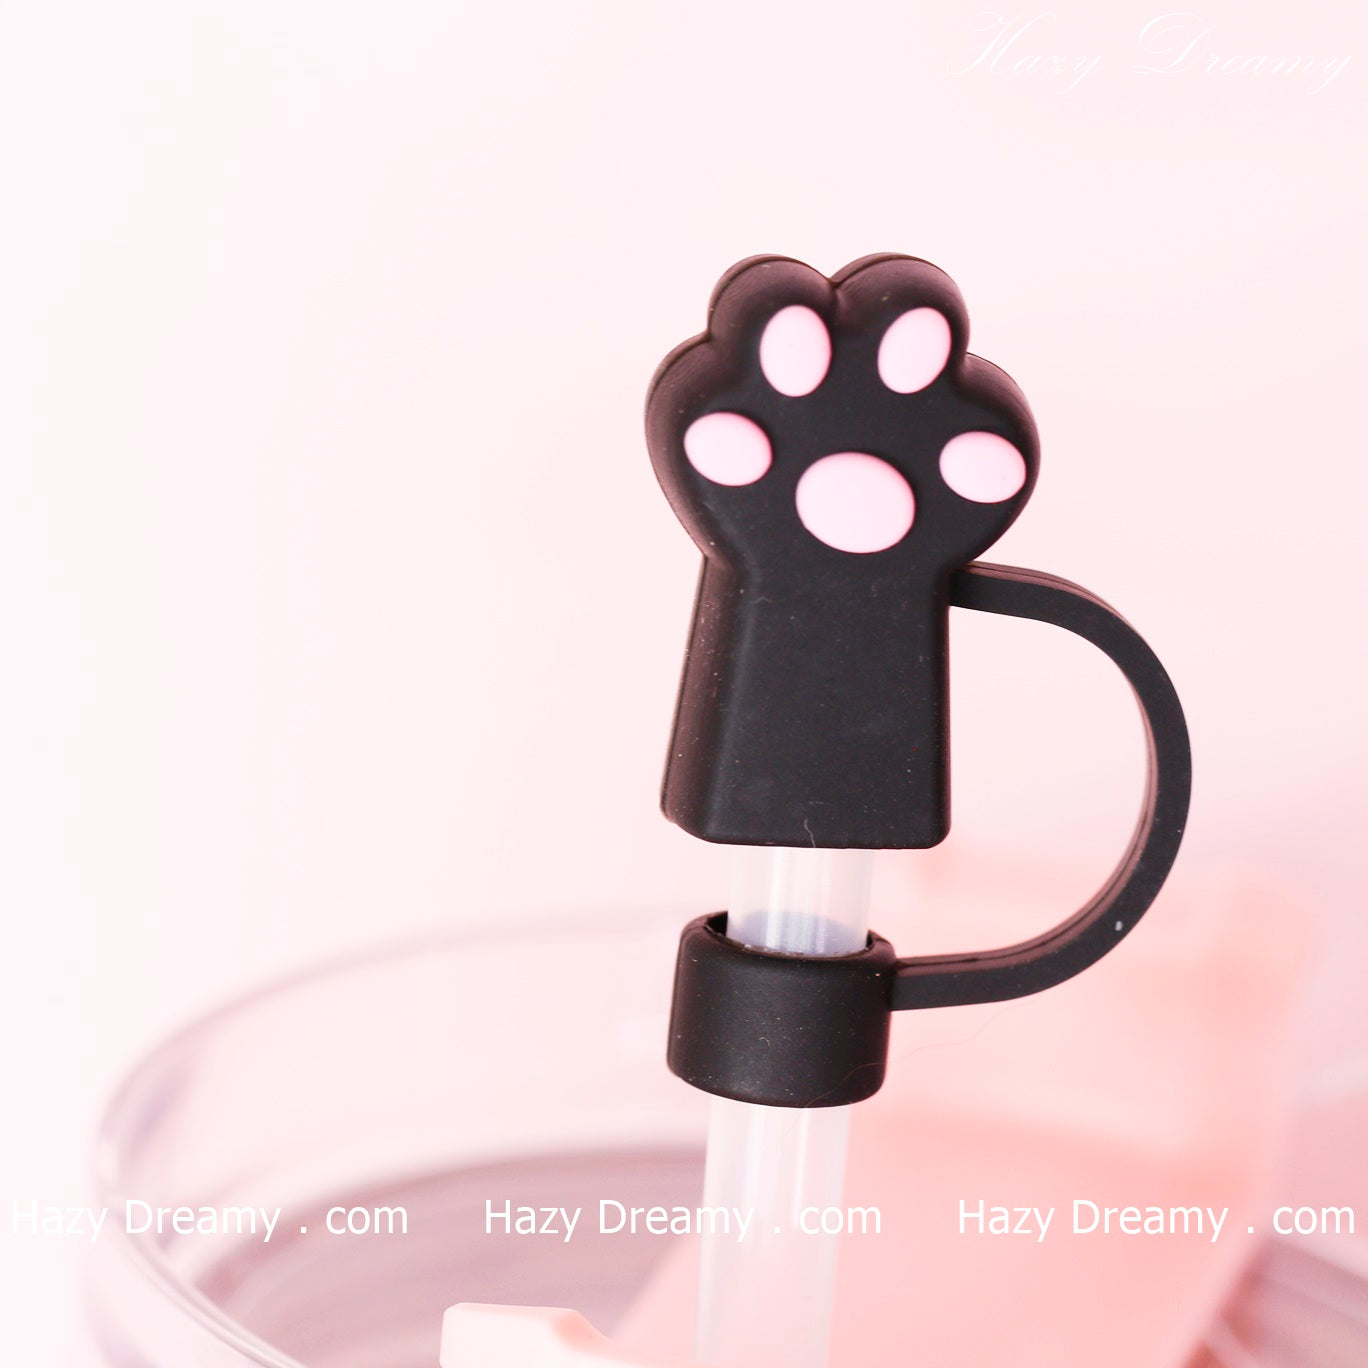 Cute Pet Paw Straw Cover for Tumblers and Cups - Perfect for School and On-the-Go